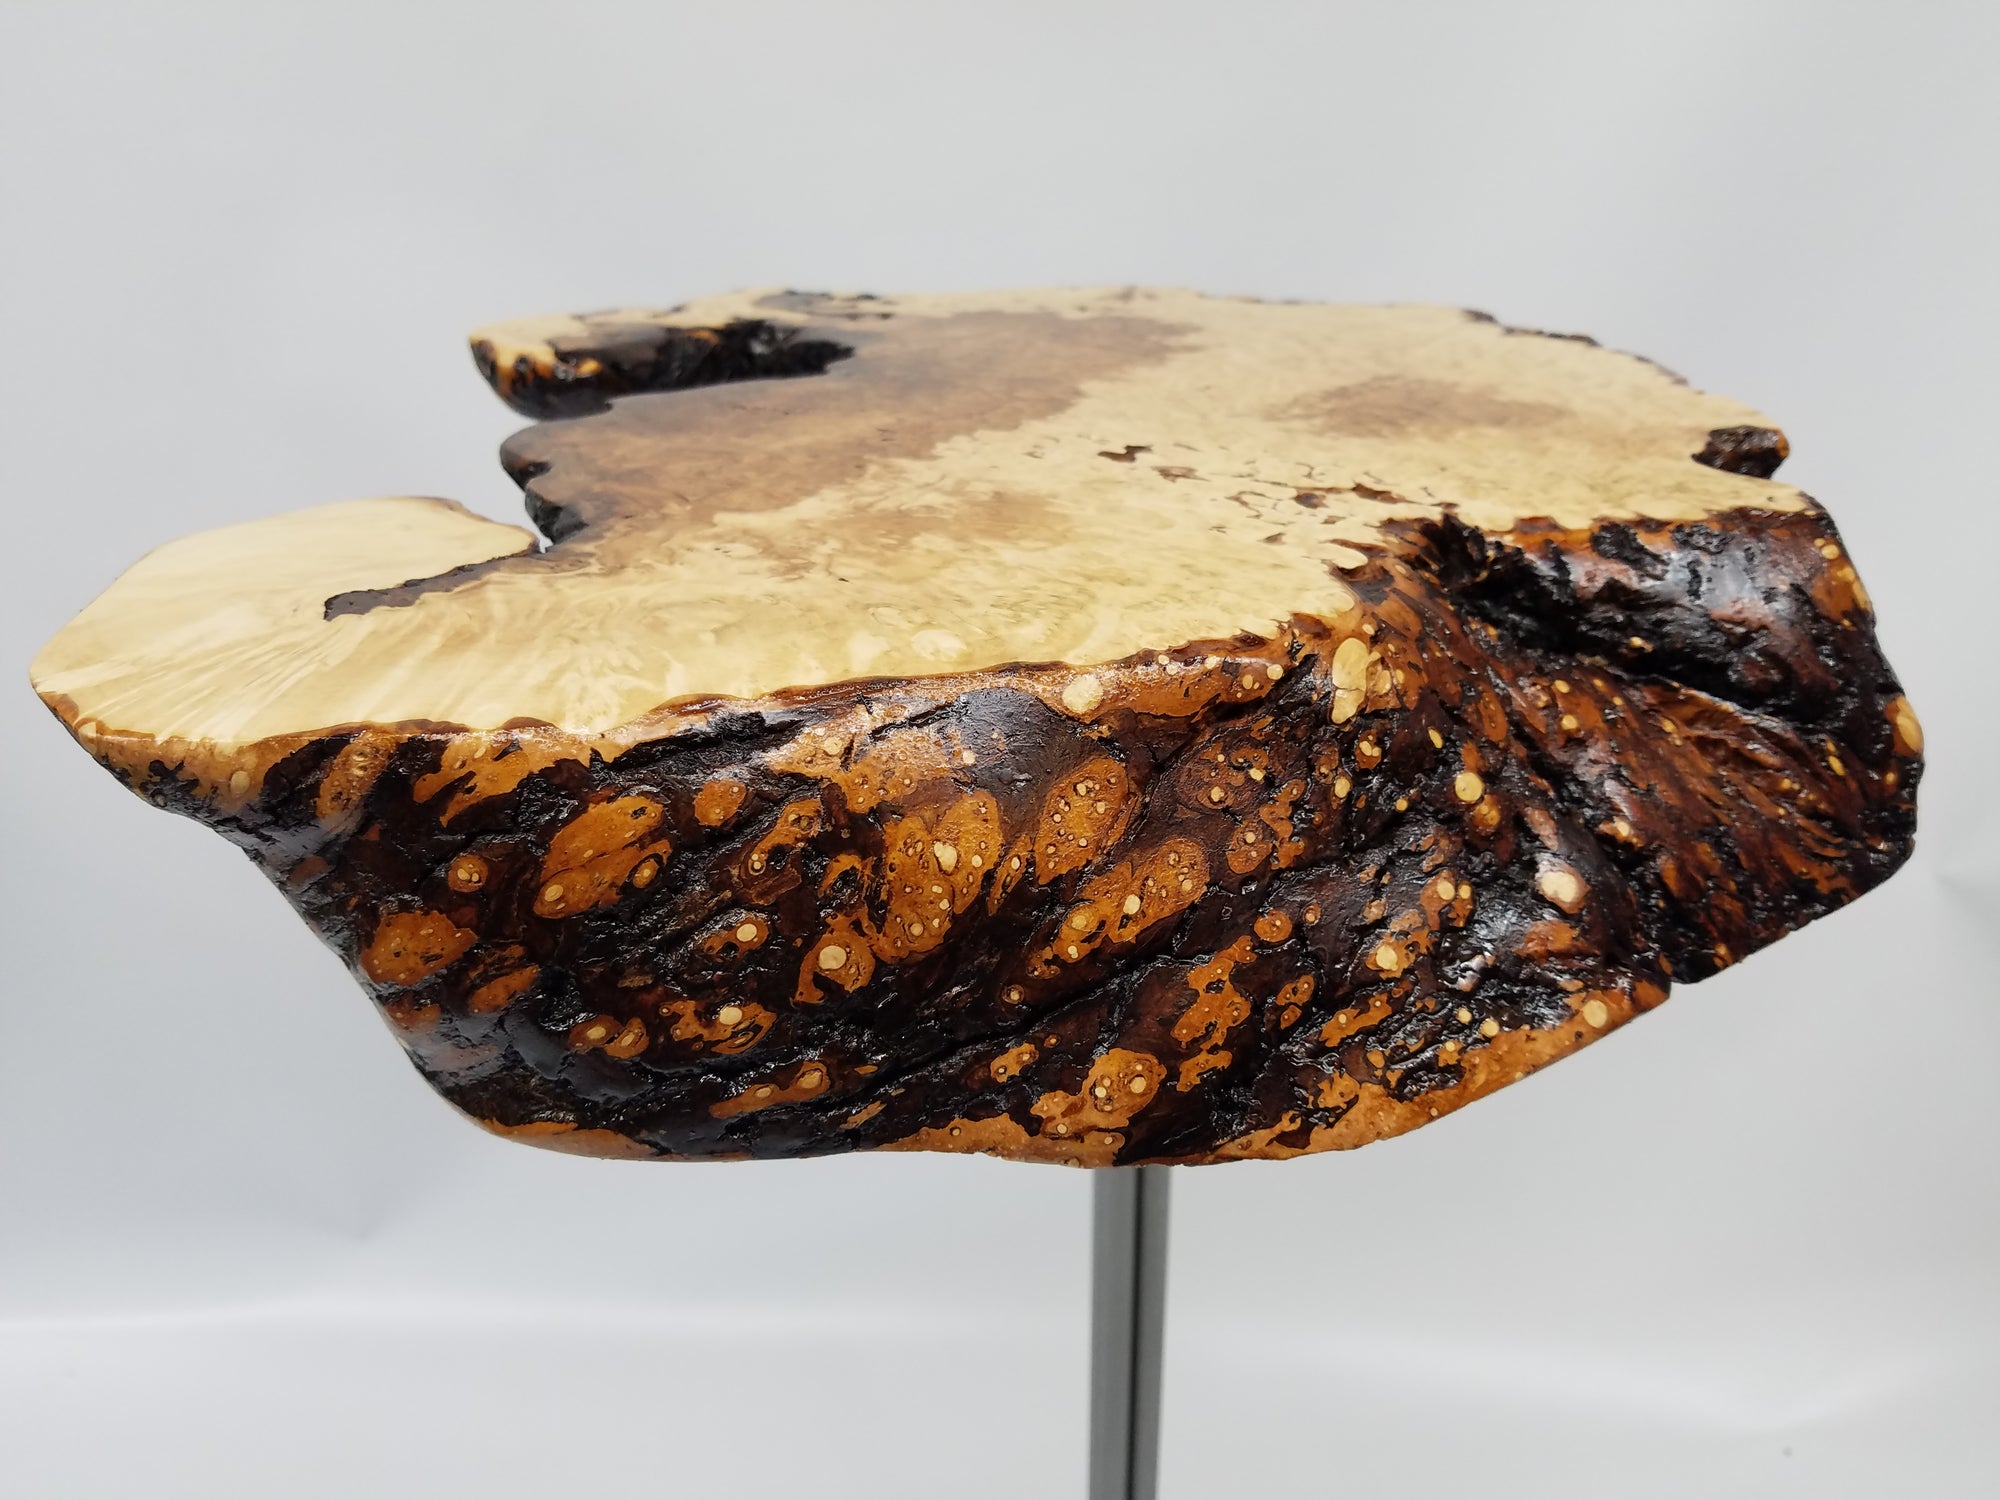 Live Edge Table- Side Table- Tree Slice- Maple Burl- Small Table- End Table- Round- Circular- Thick Wood- Natural Wood- Unique Table- Crab